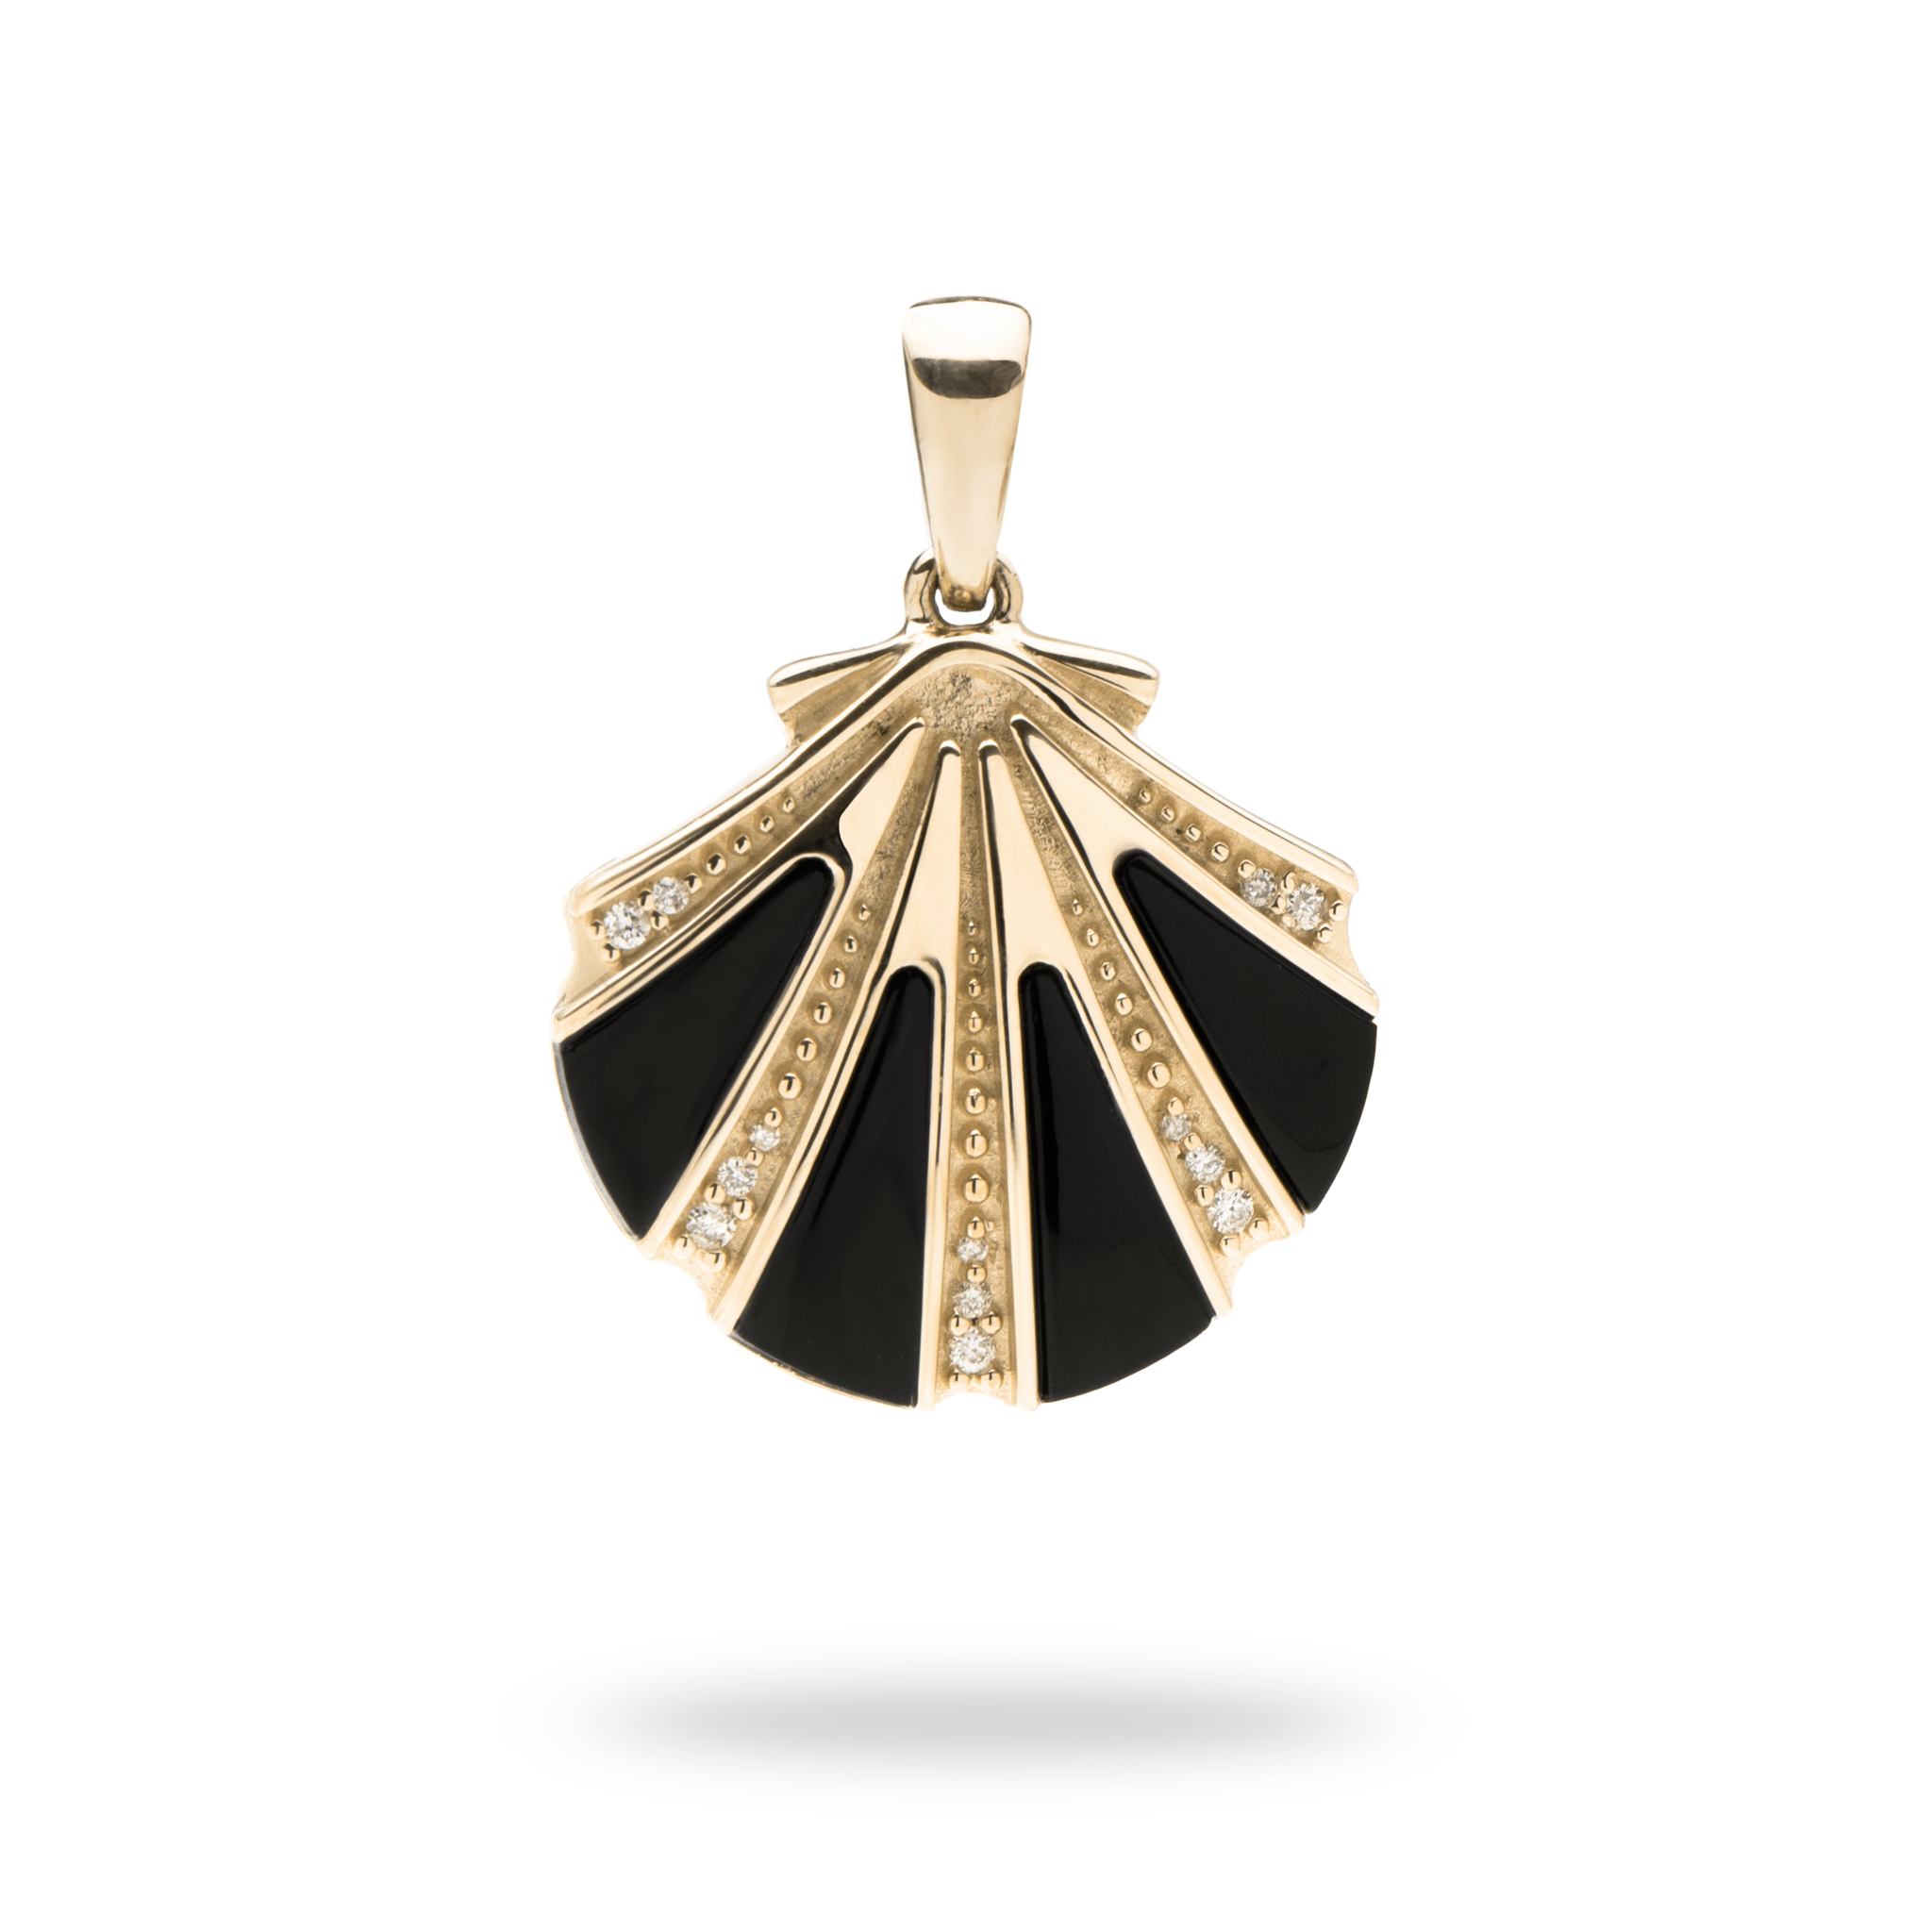 Sealife Seashell Black Coral Pendant in Gold with Diamonds - 18mm